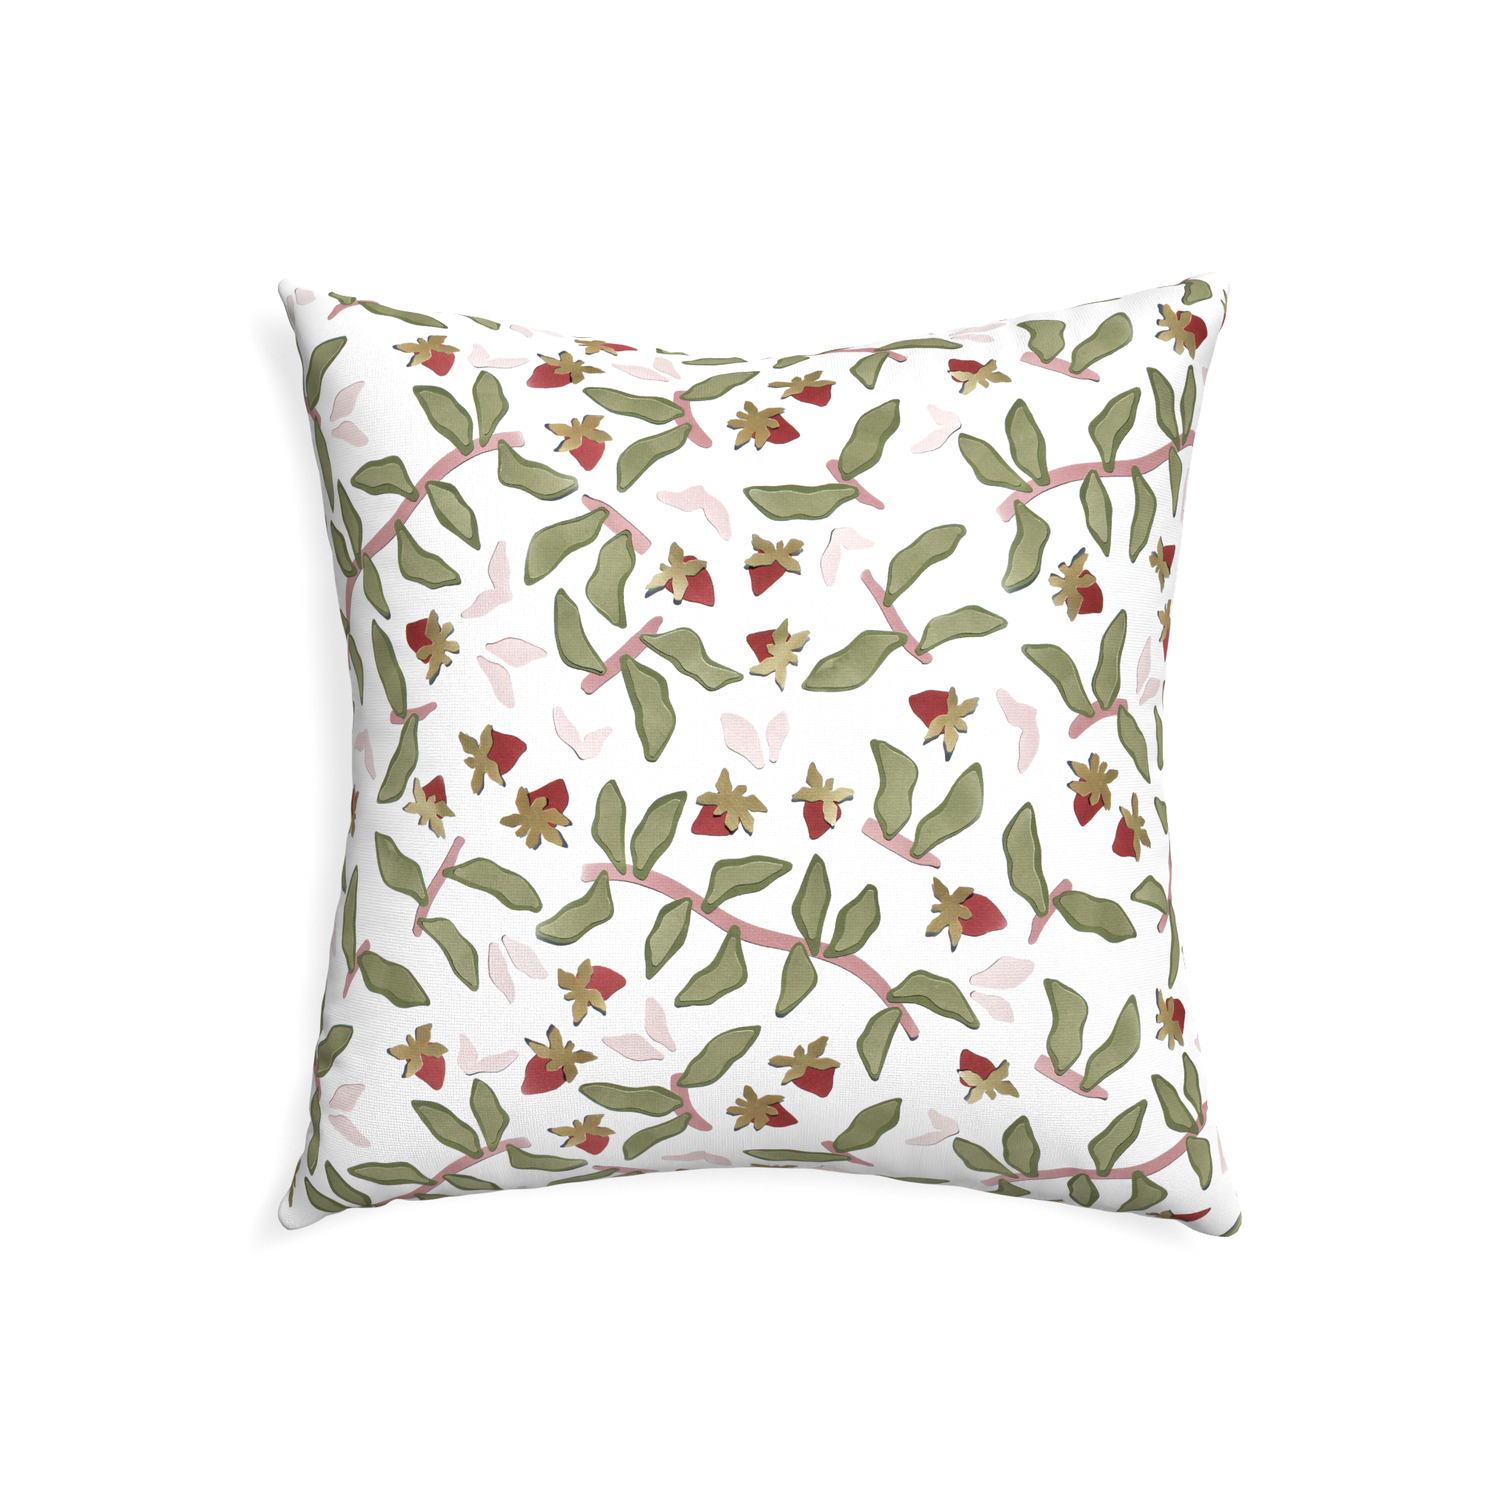 22-square nellie custom strawberry & botanicalpillow with none on white background